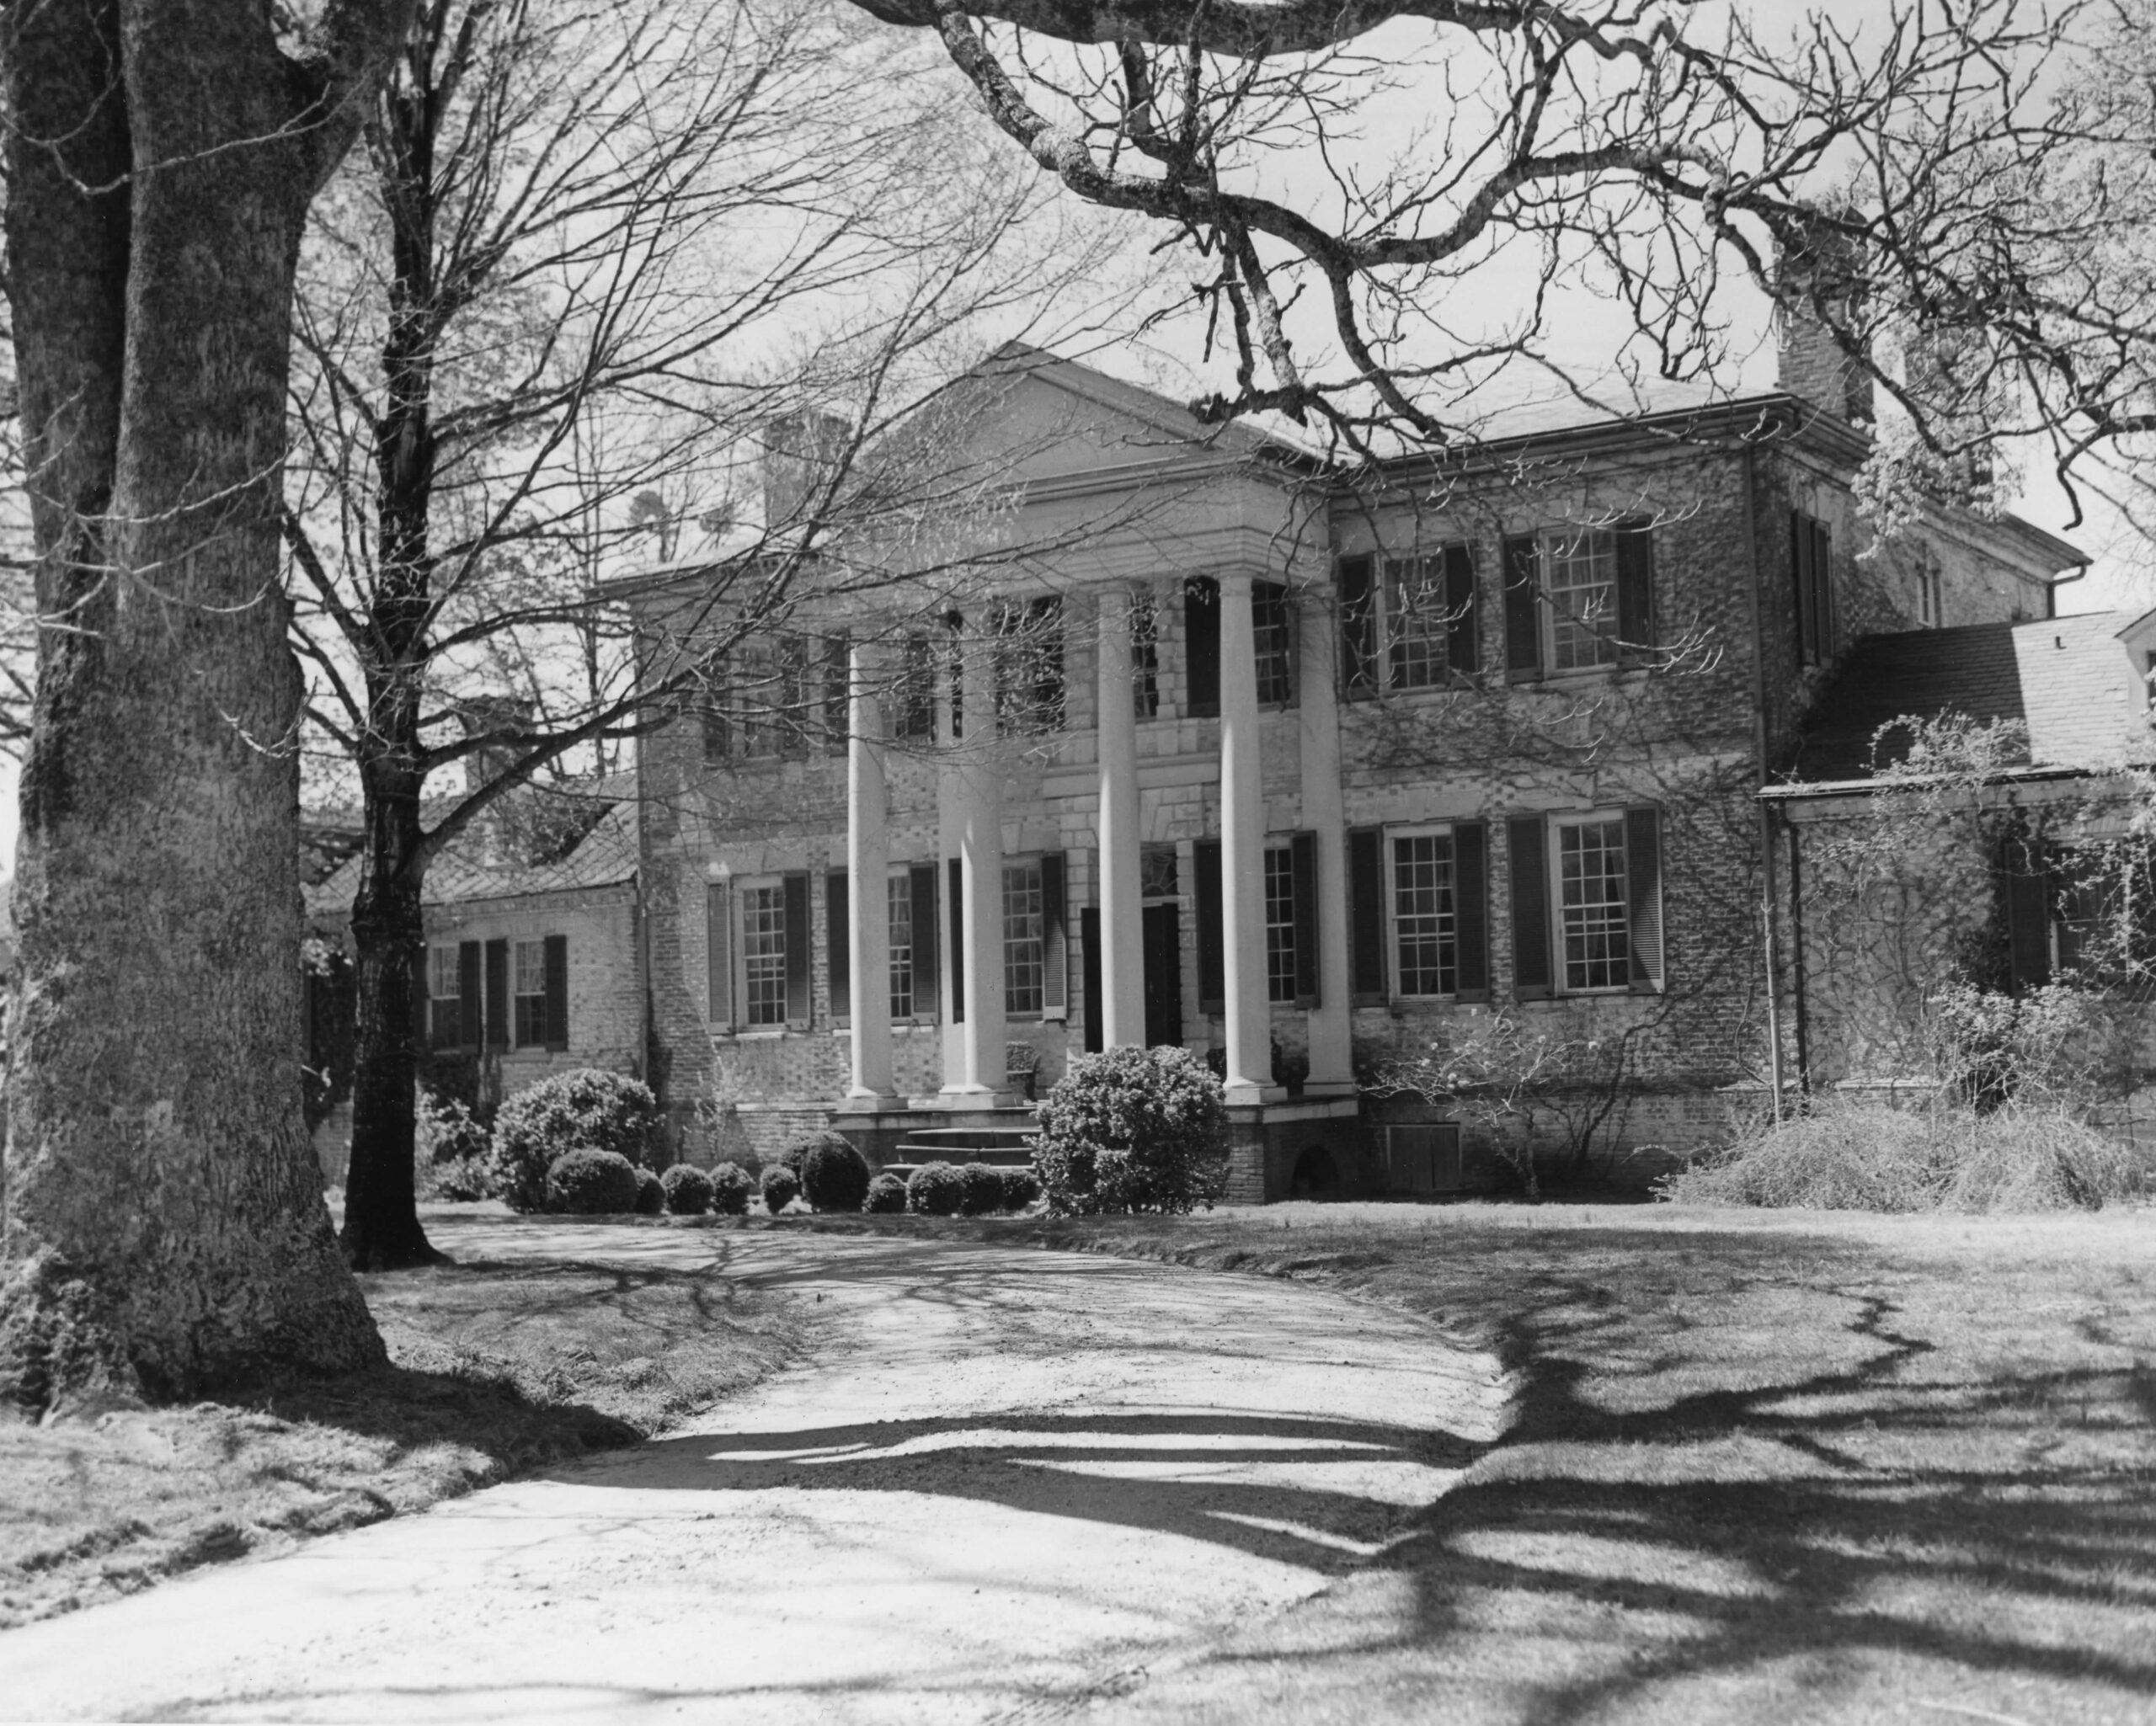 North Elevation. Photo credit: Virginia Chamber of Commerce, 1934